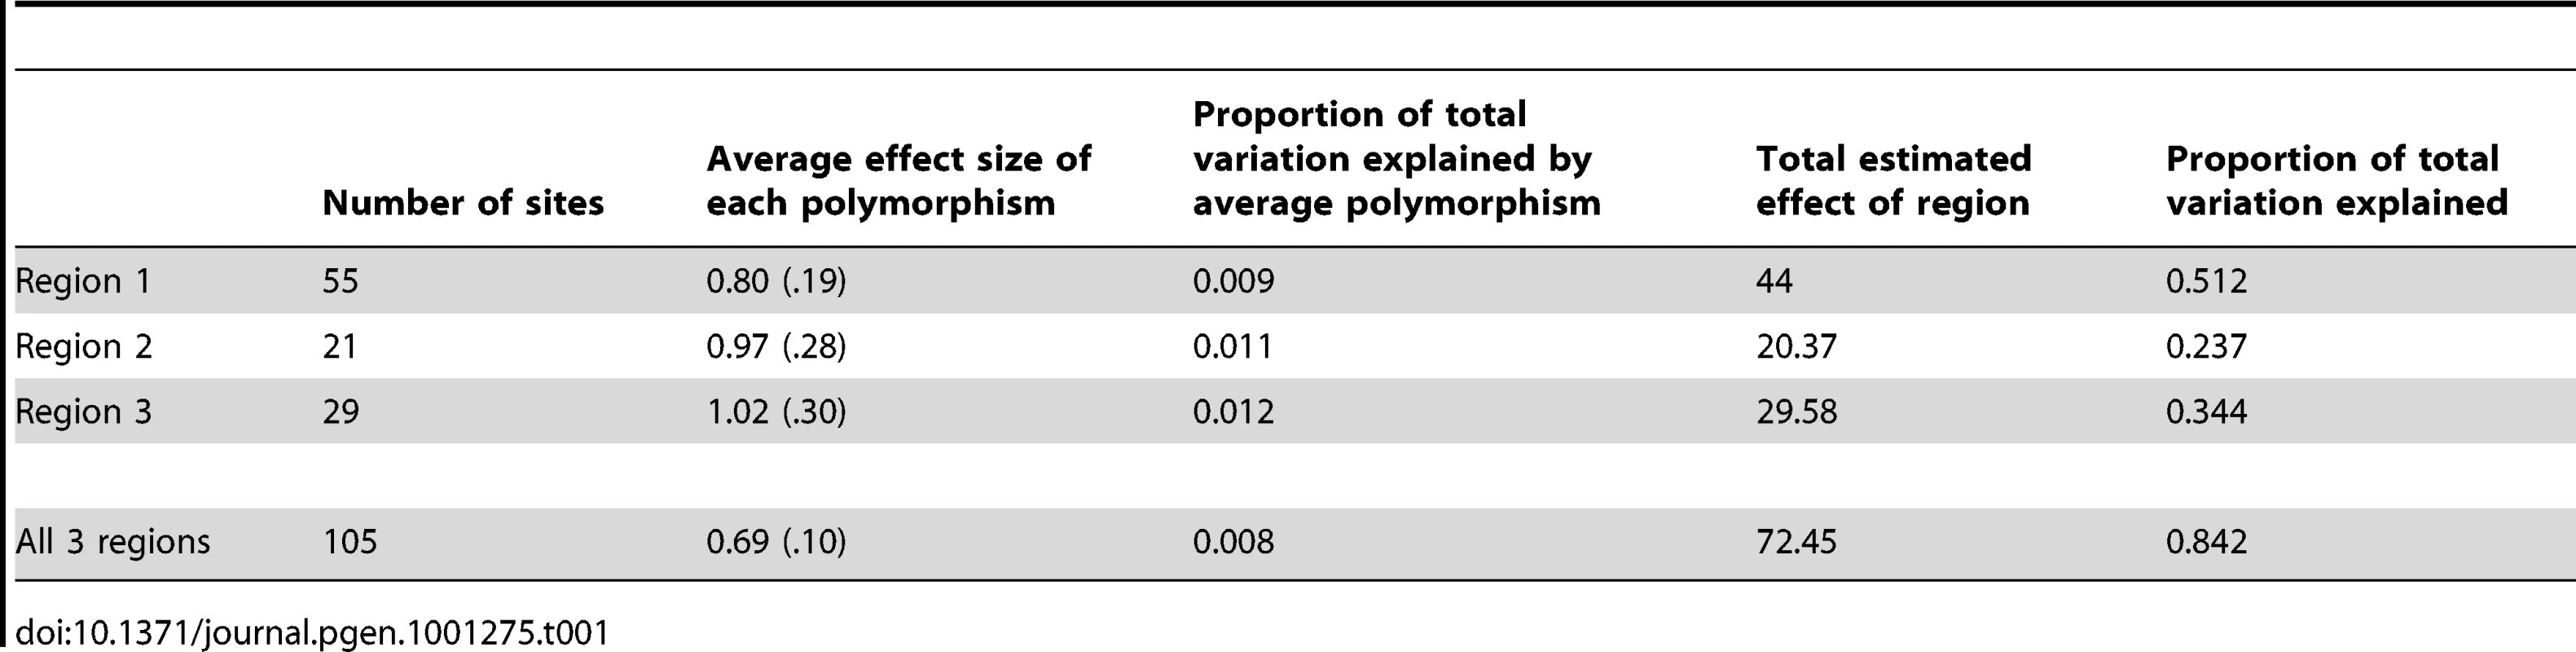 Estimation of polymorphism and region effect size.